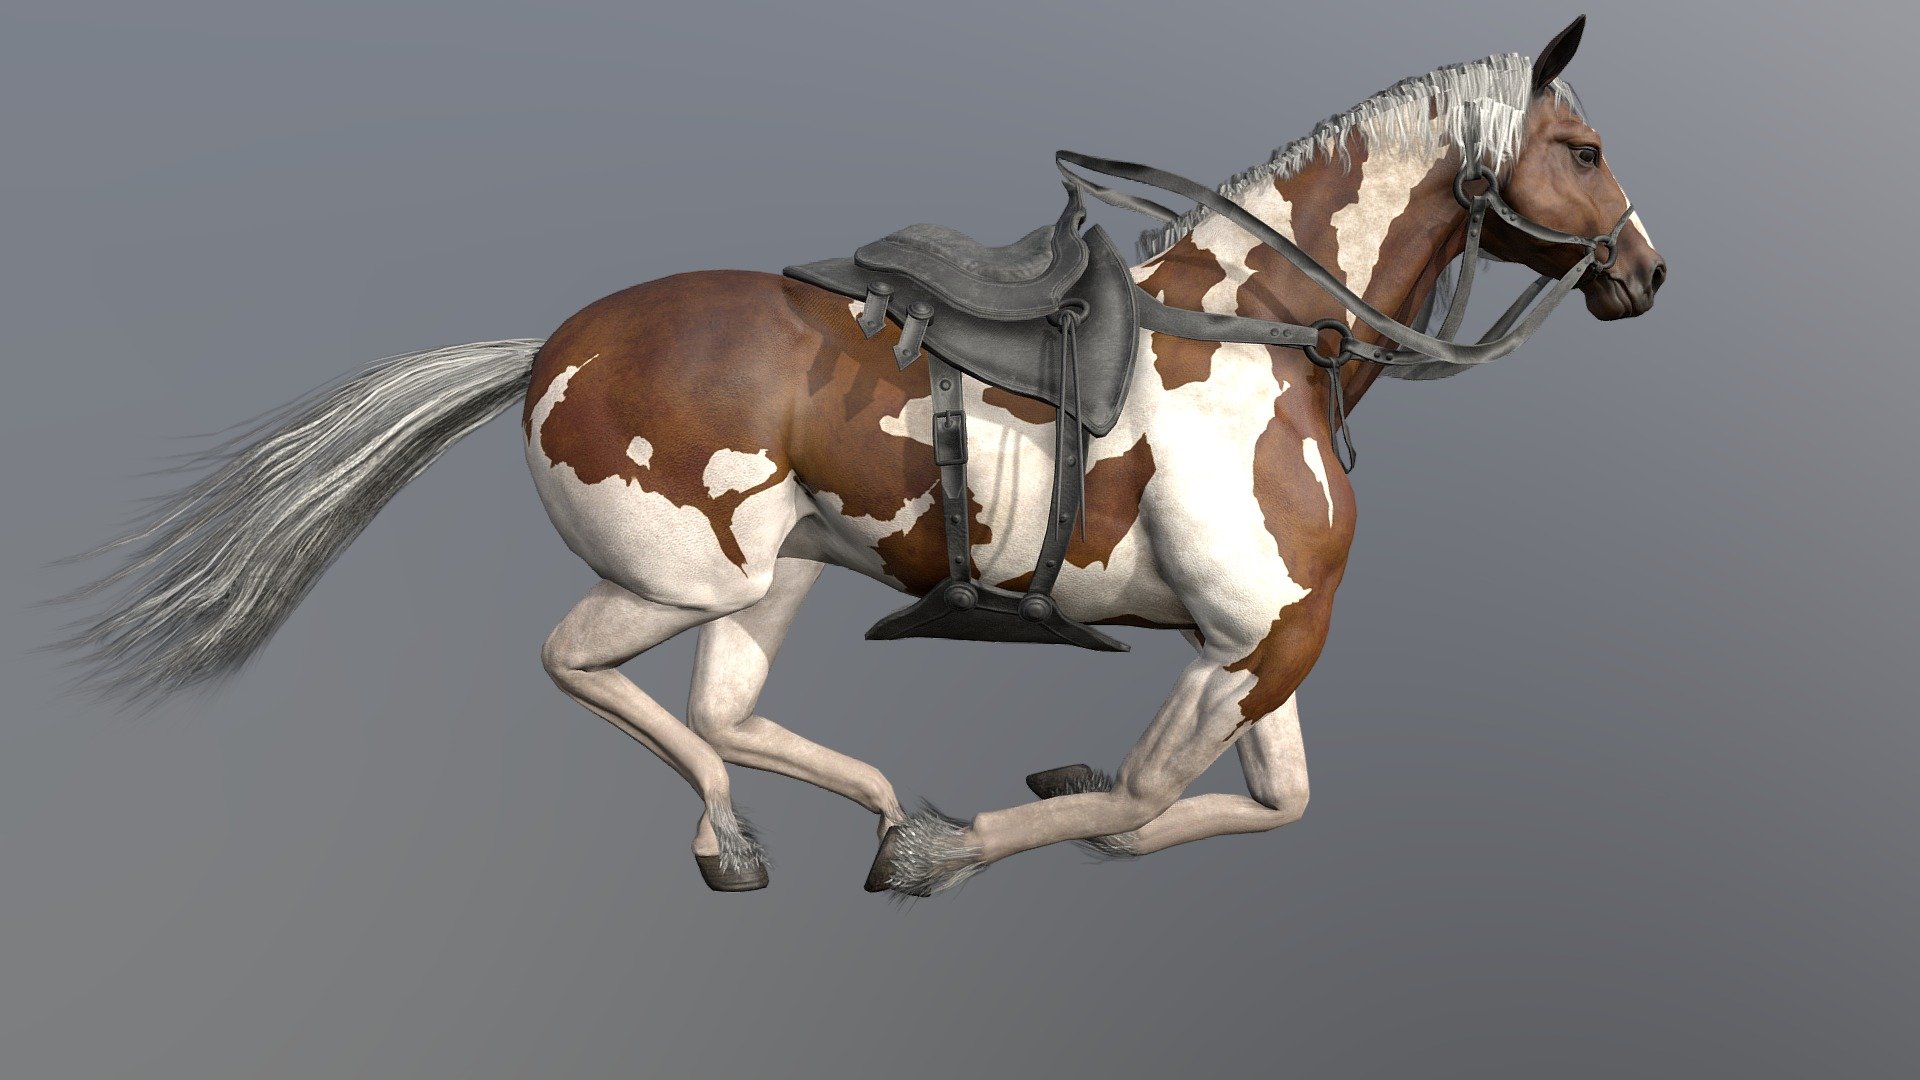 Horse Run cycle animated 3d model in fbx file format - Horse Run cycle - Buy Royalty Free 3D model by aaokiji 3d model